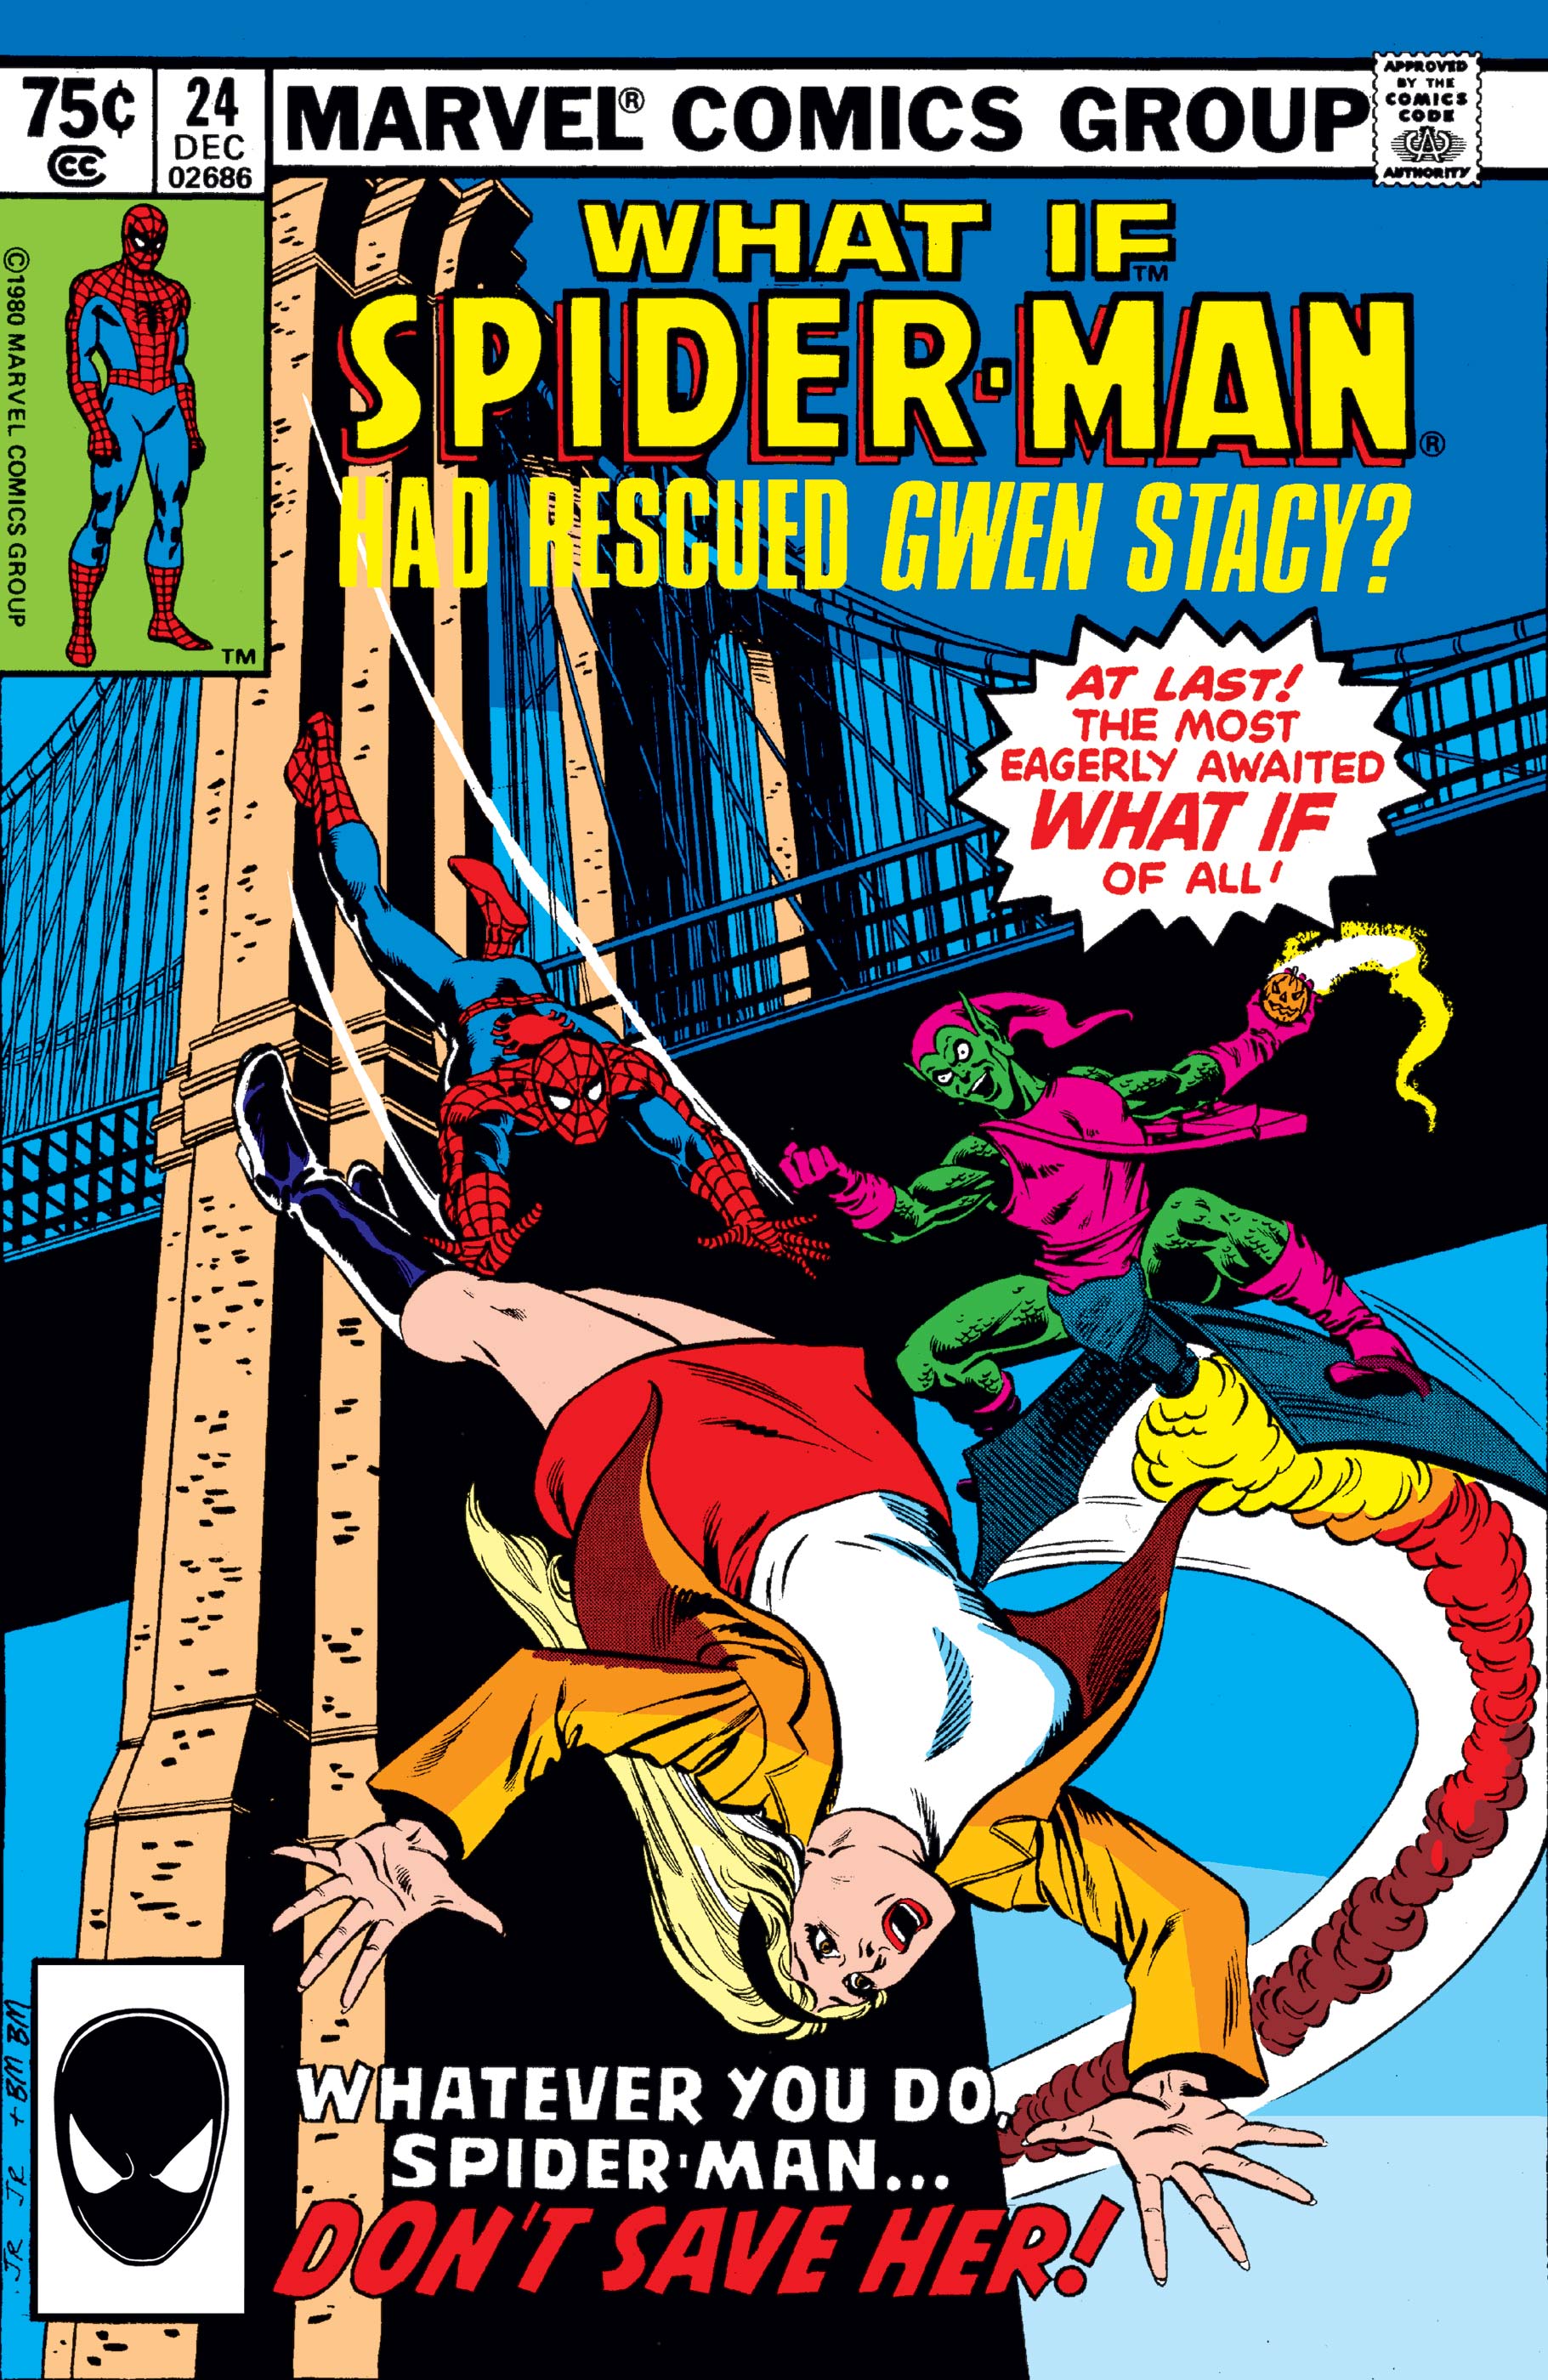 What If? (1977) #24